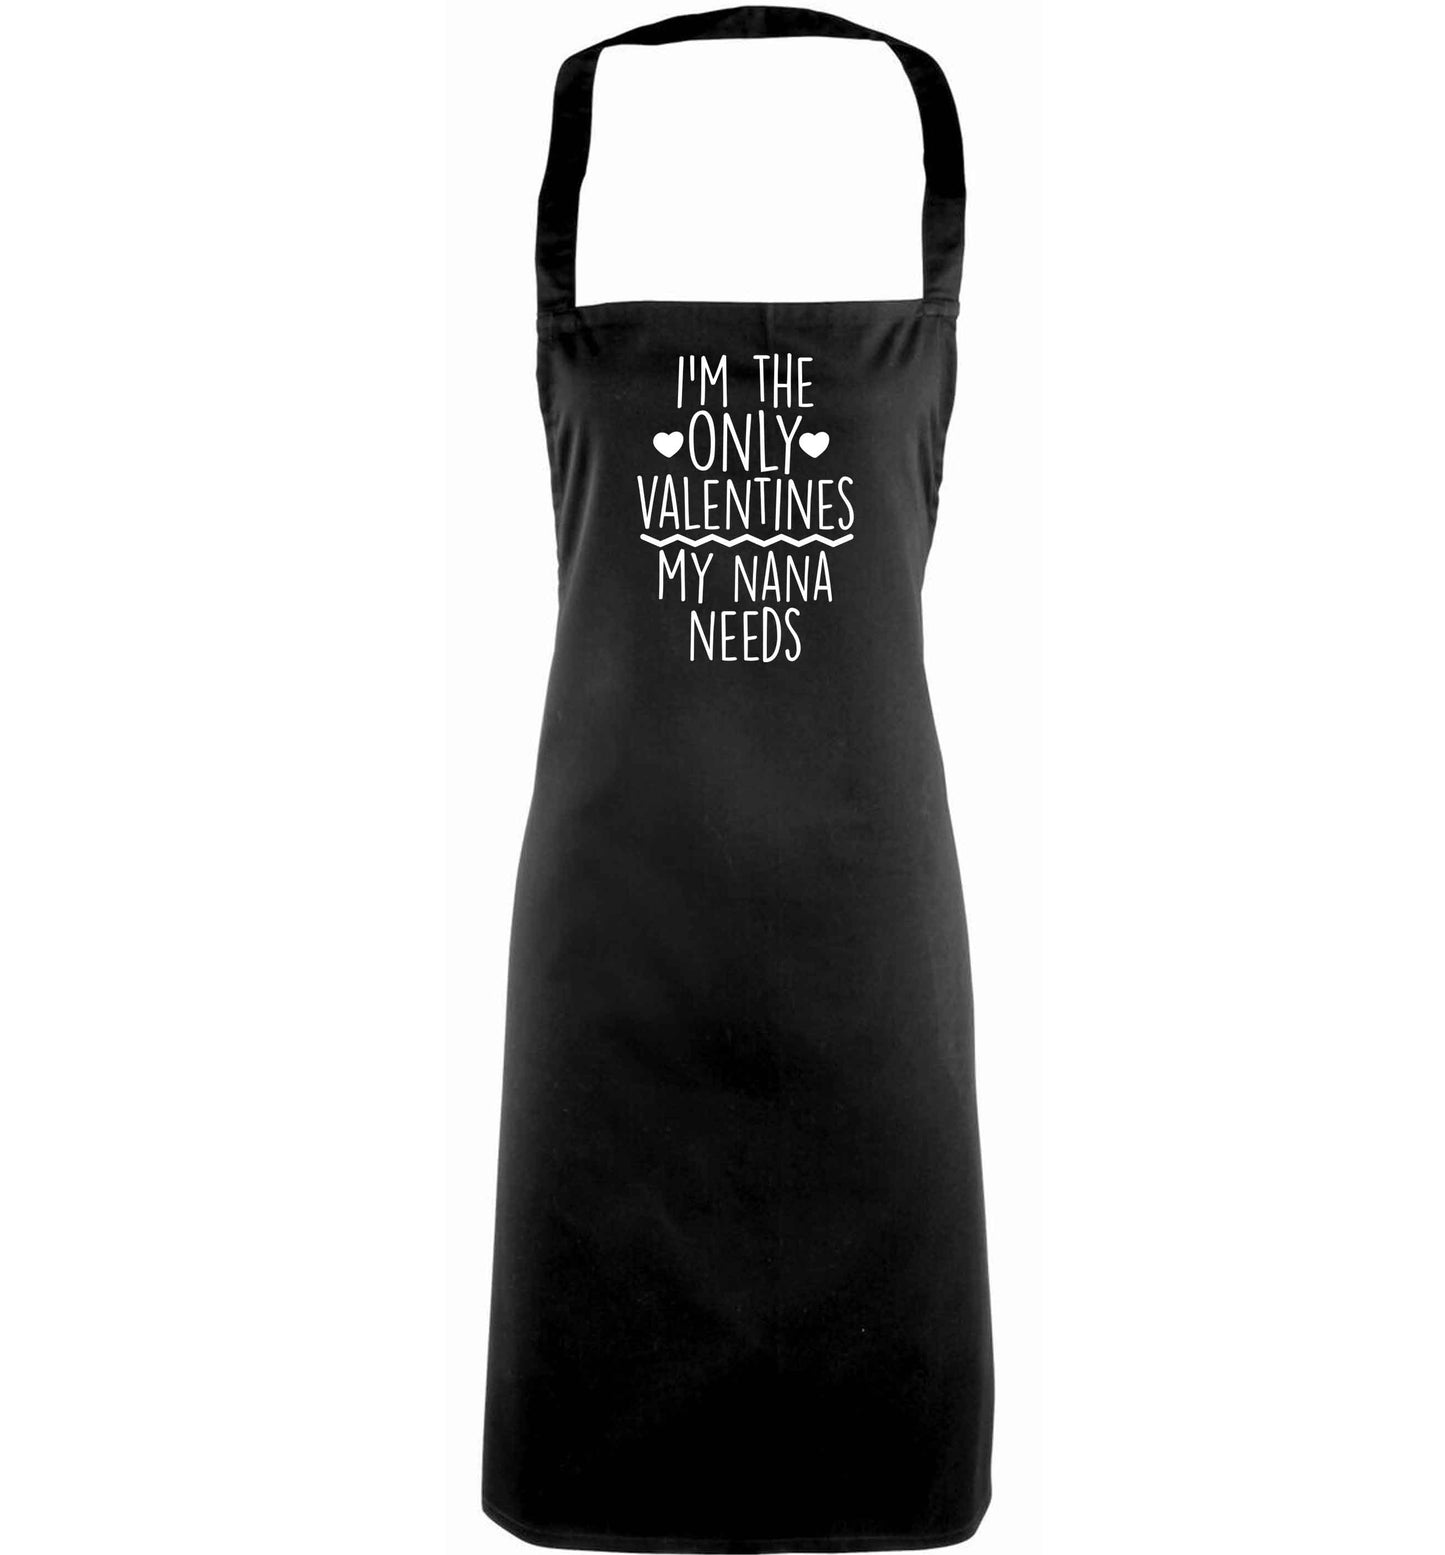 I'm the only valentines my nana needs adults black apron